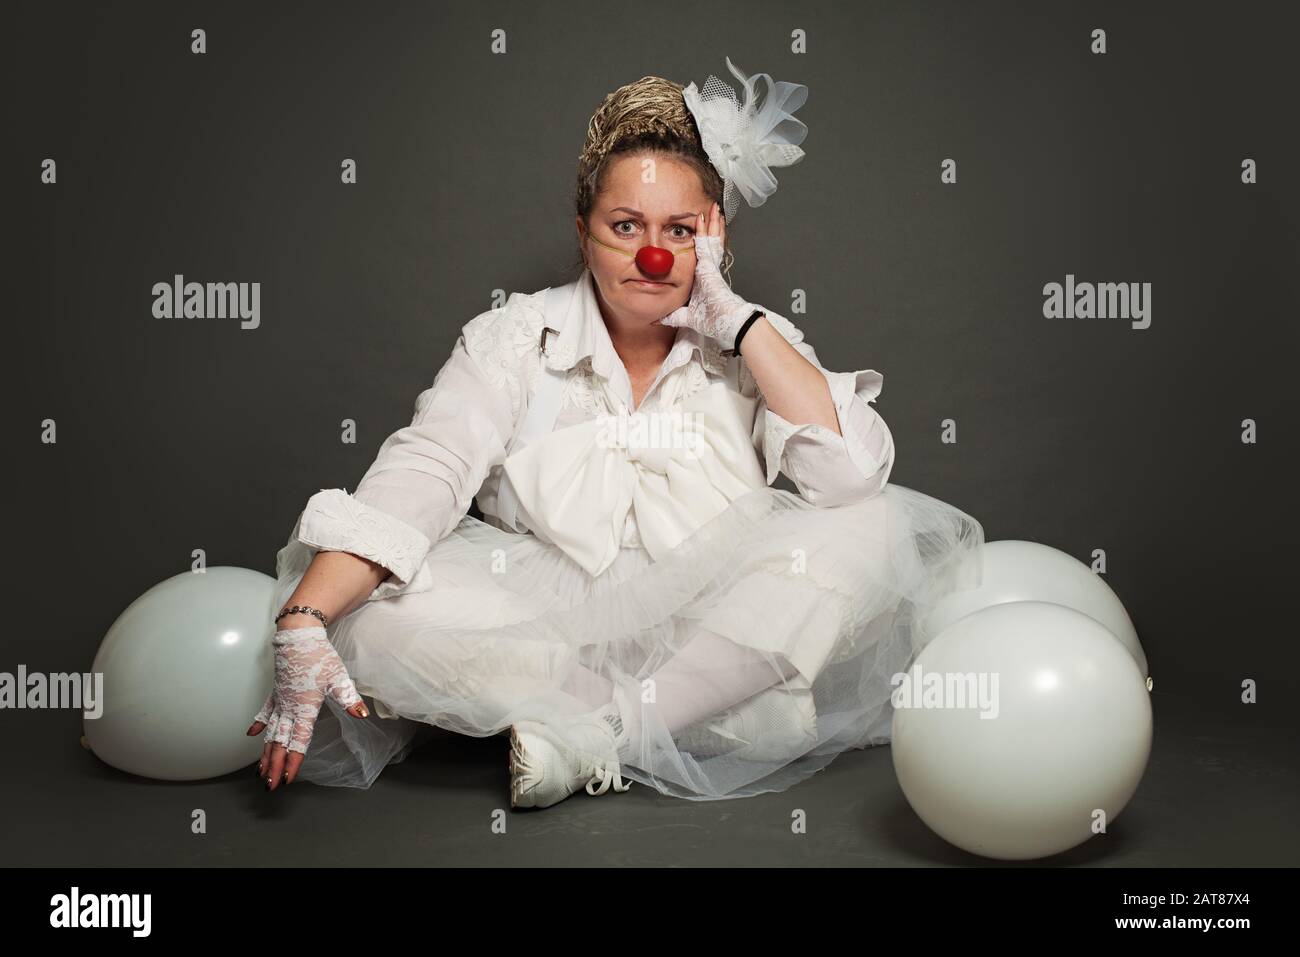 Portrait of woman clown. Performance Actress at work, White Clown Character Stock Photo